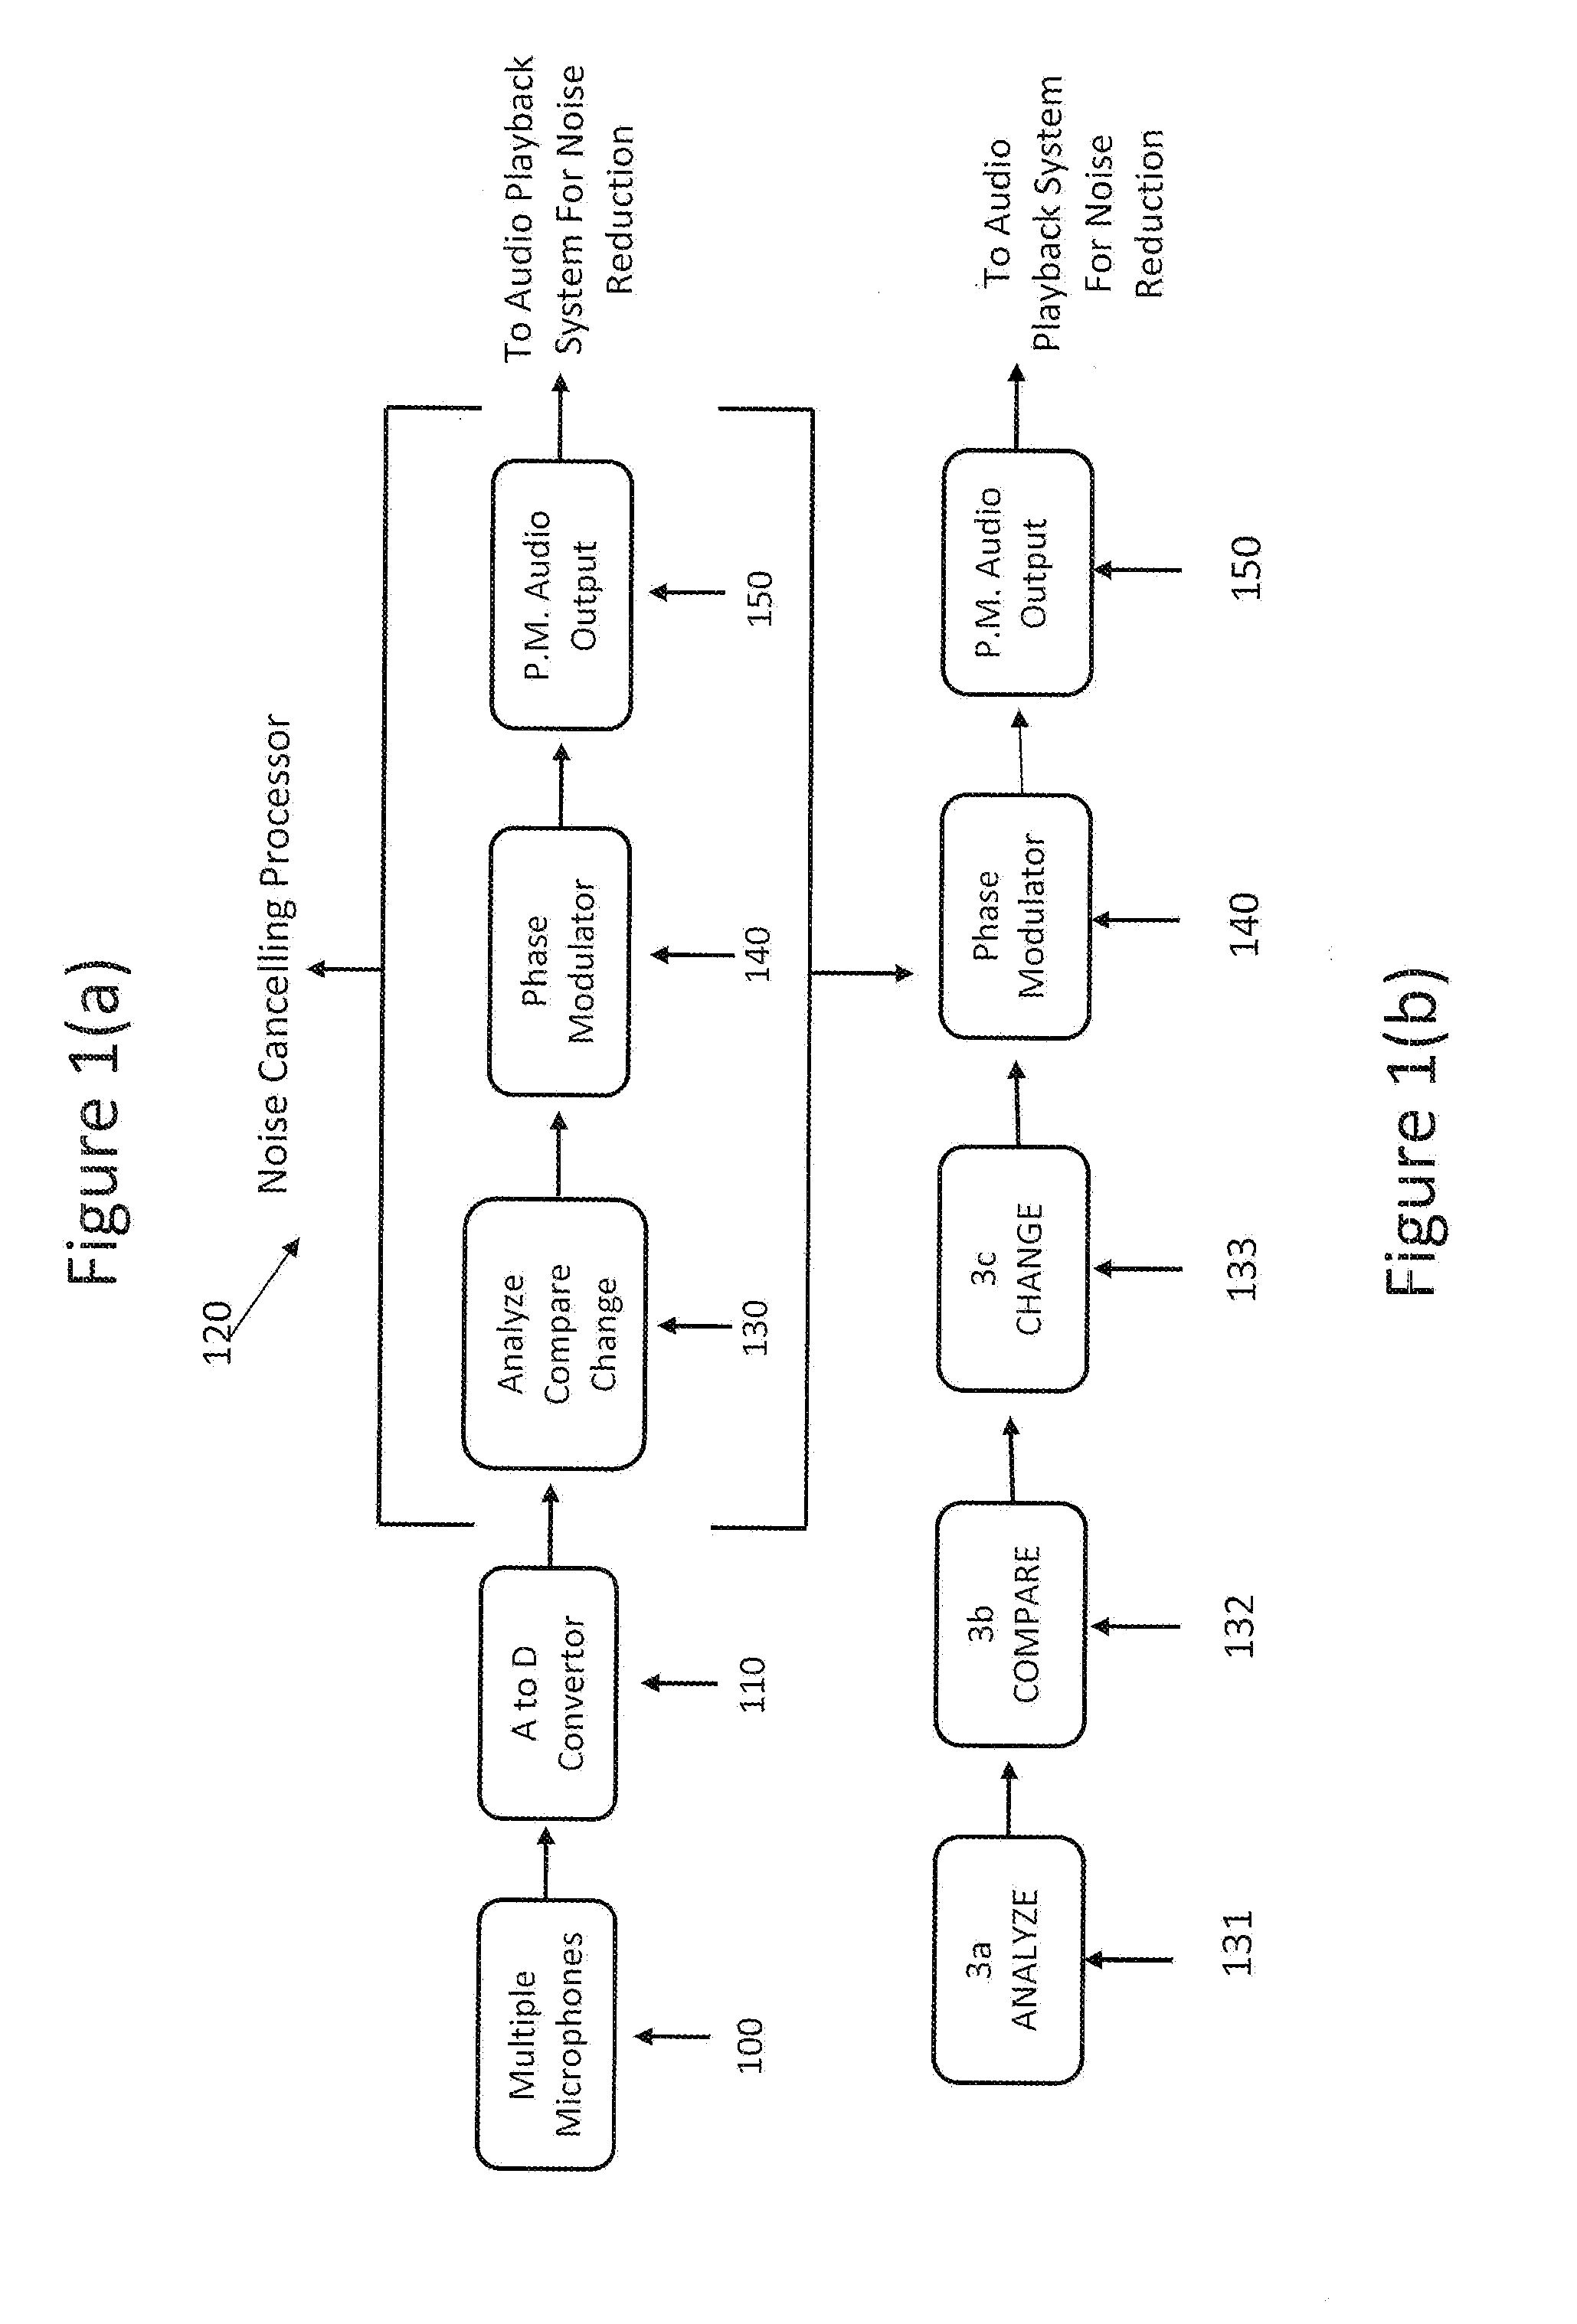 Active noise cancellation method for enclosed cabins